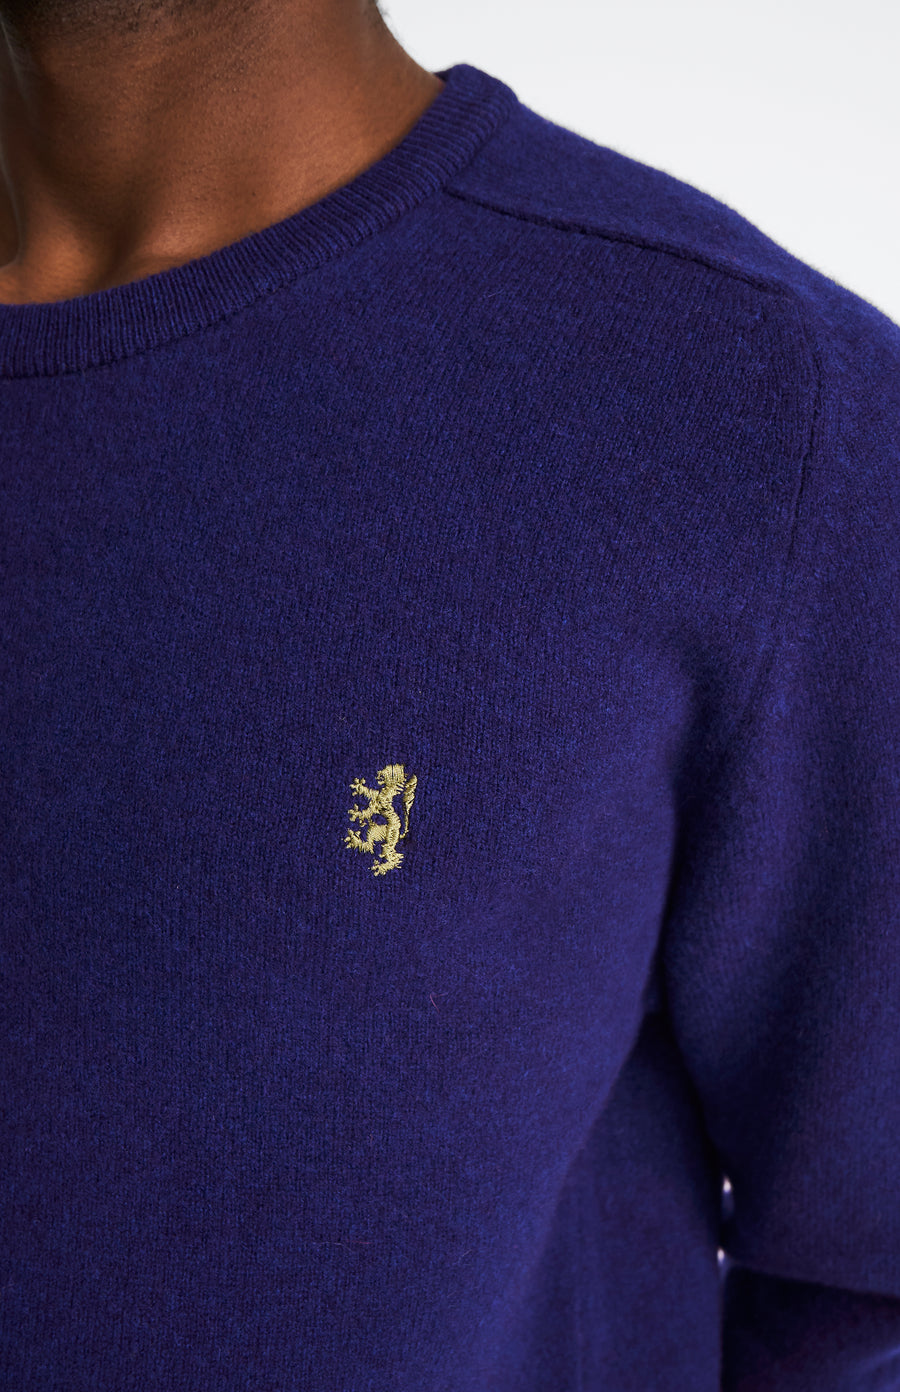 Pringle Round Neck Lion Lambswool Jumper In Royal Blue & Mineral Green showing embroidery